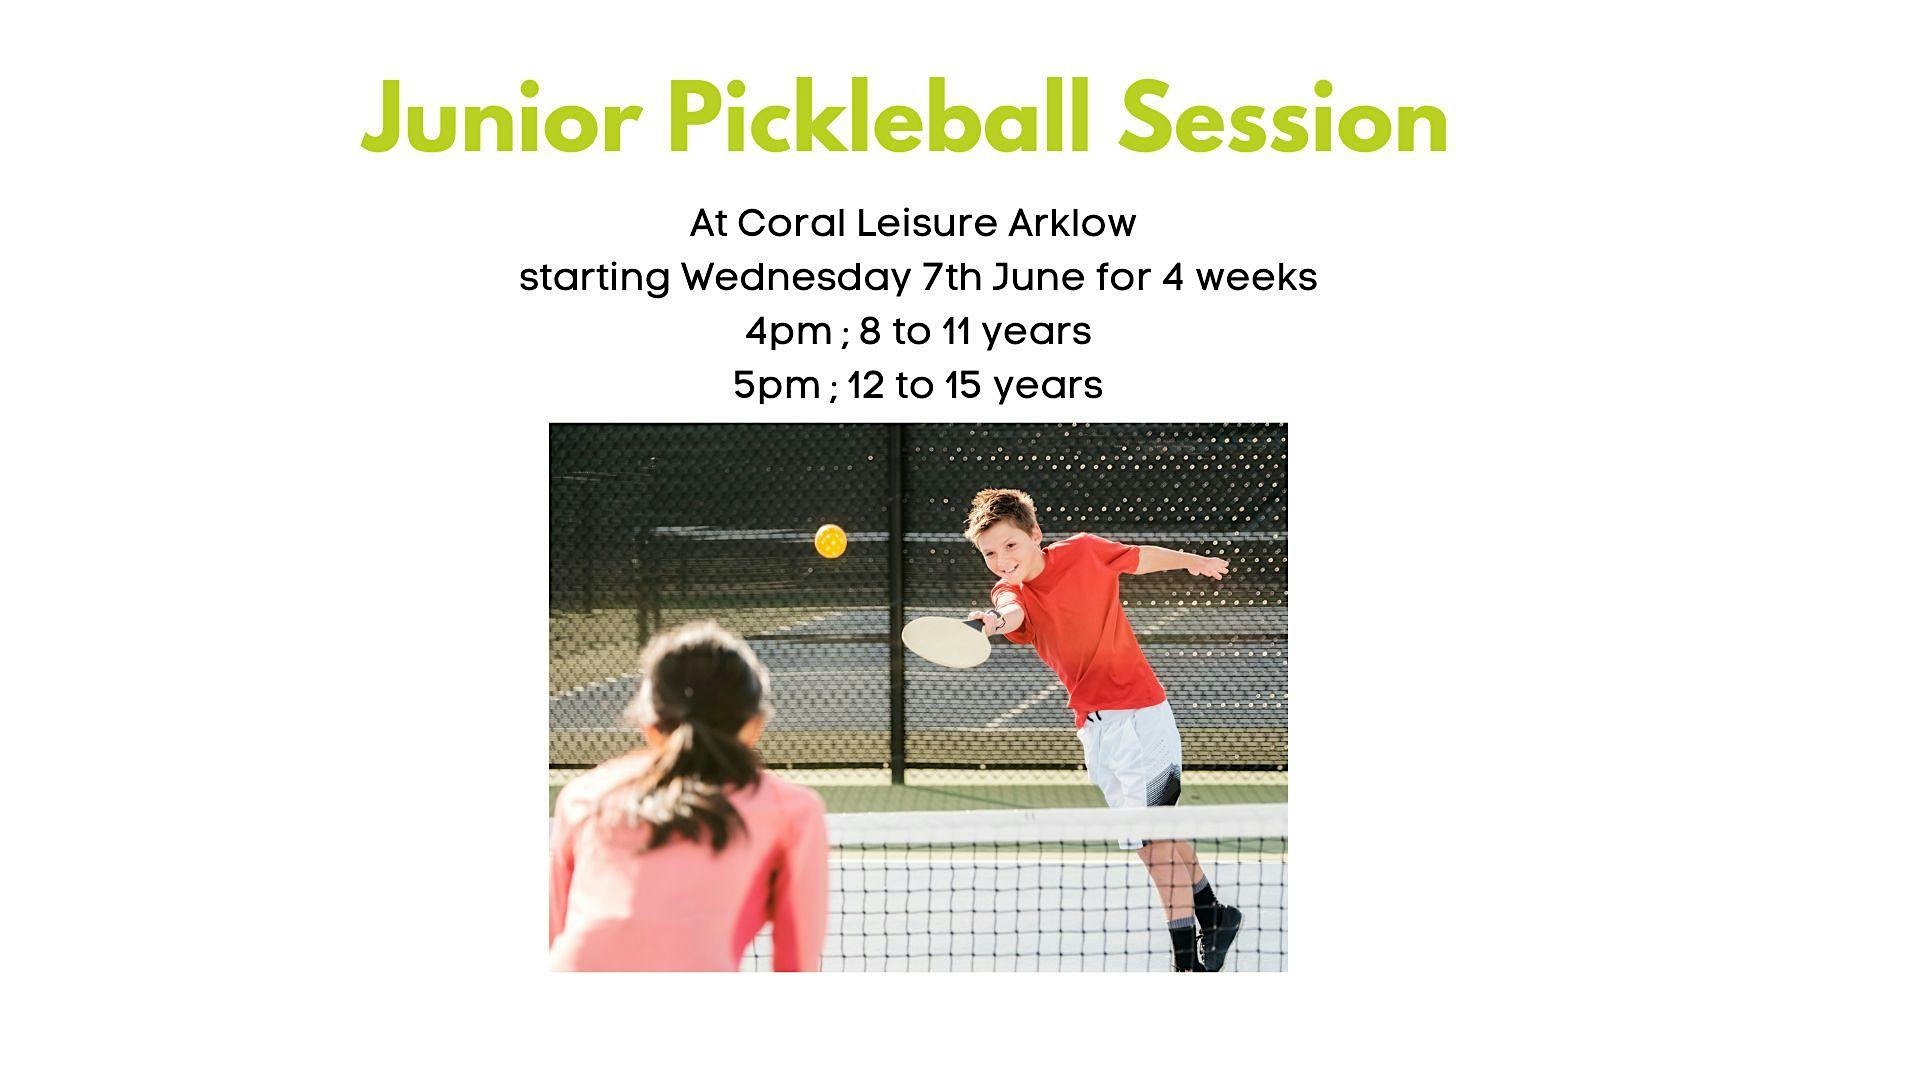 Try out Pickleball for 8years to 11 years